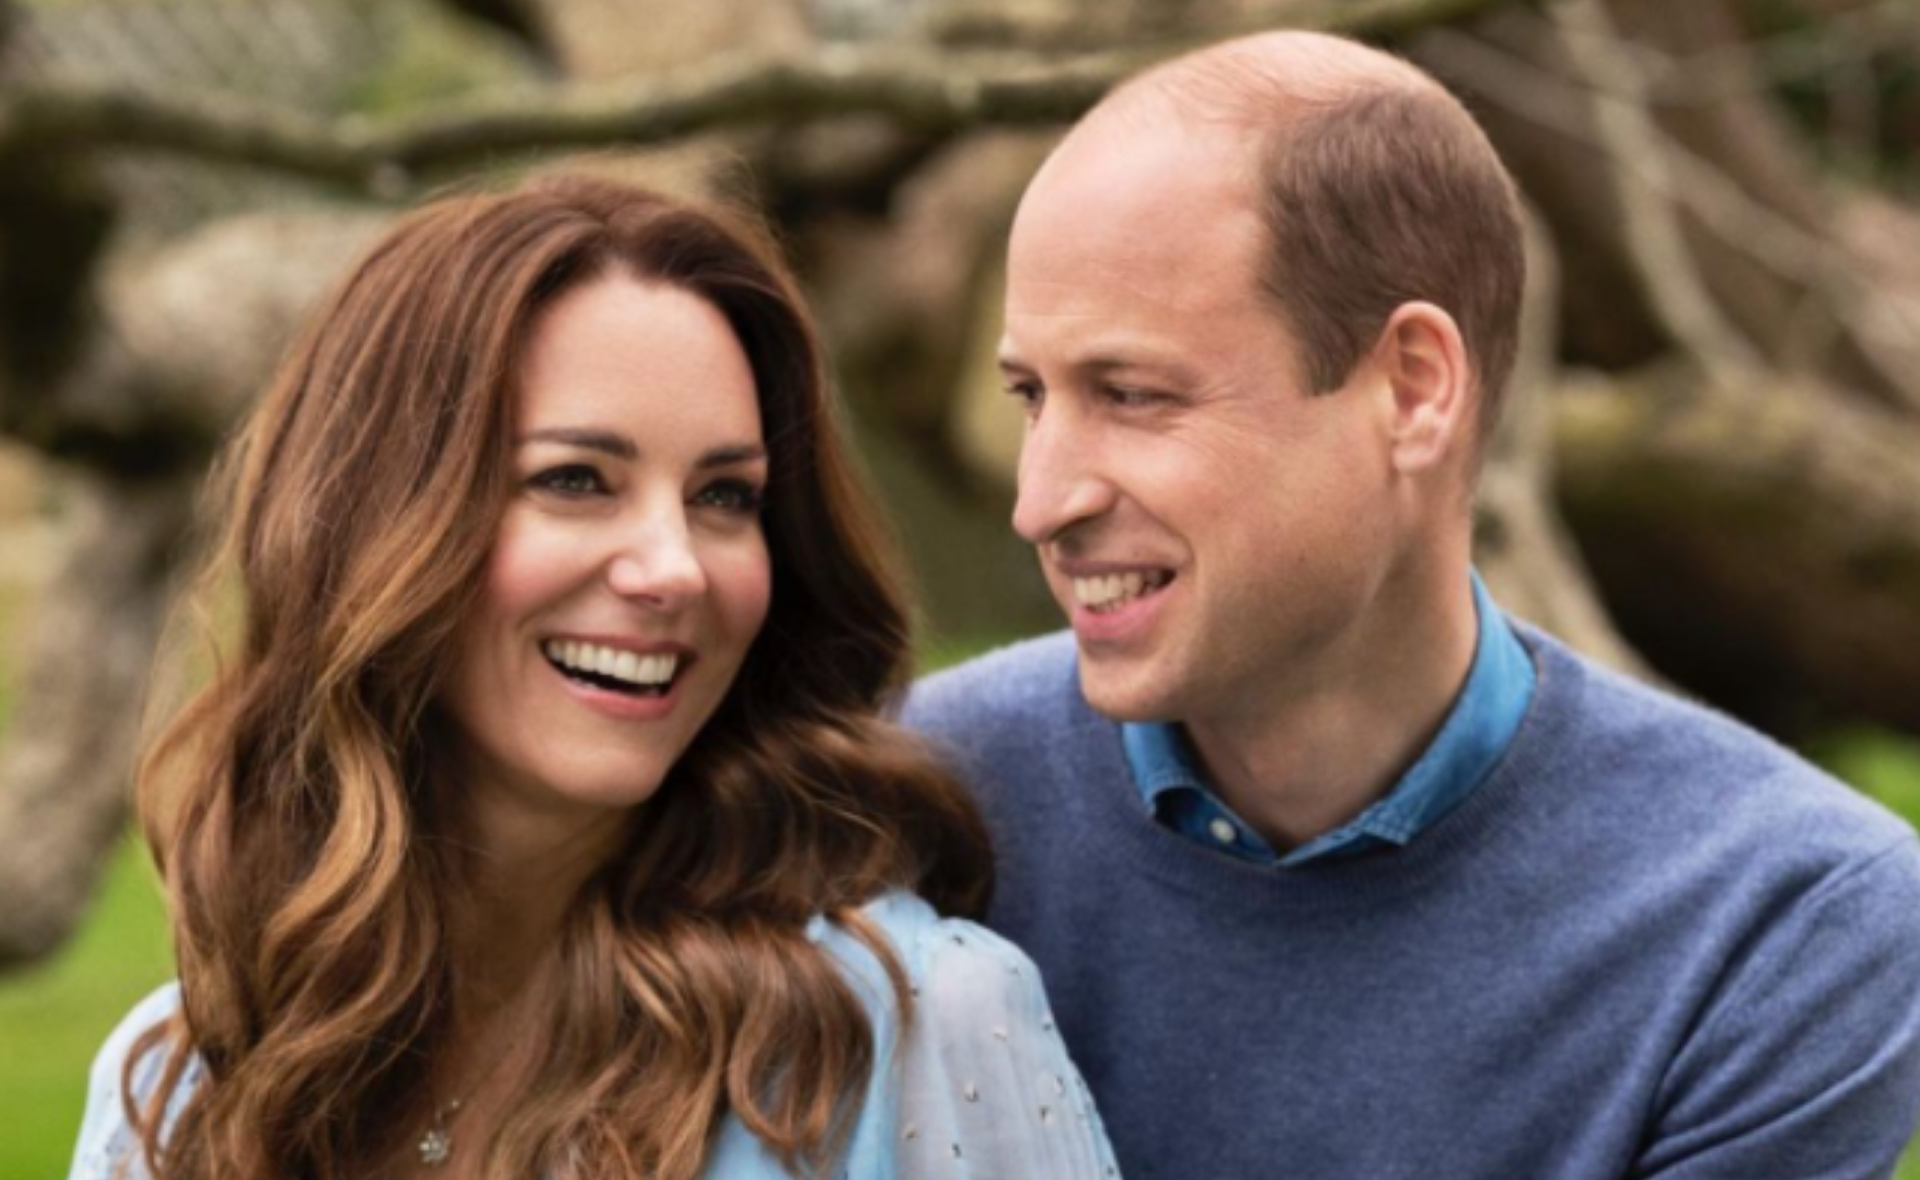 “10 years”: Two stunning new portraits of Prince William & Duchess Catherine have been unveiled for their milestone wedding anniversary